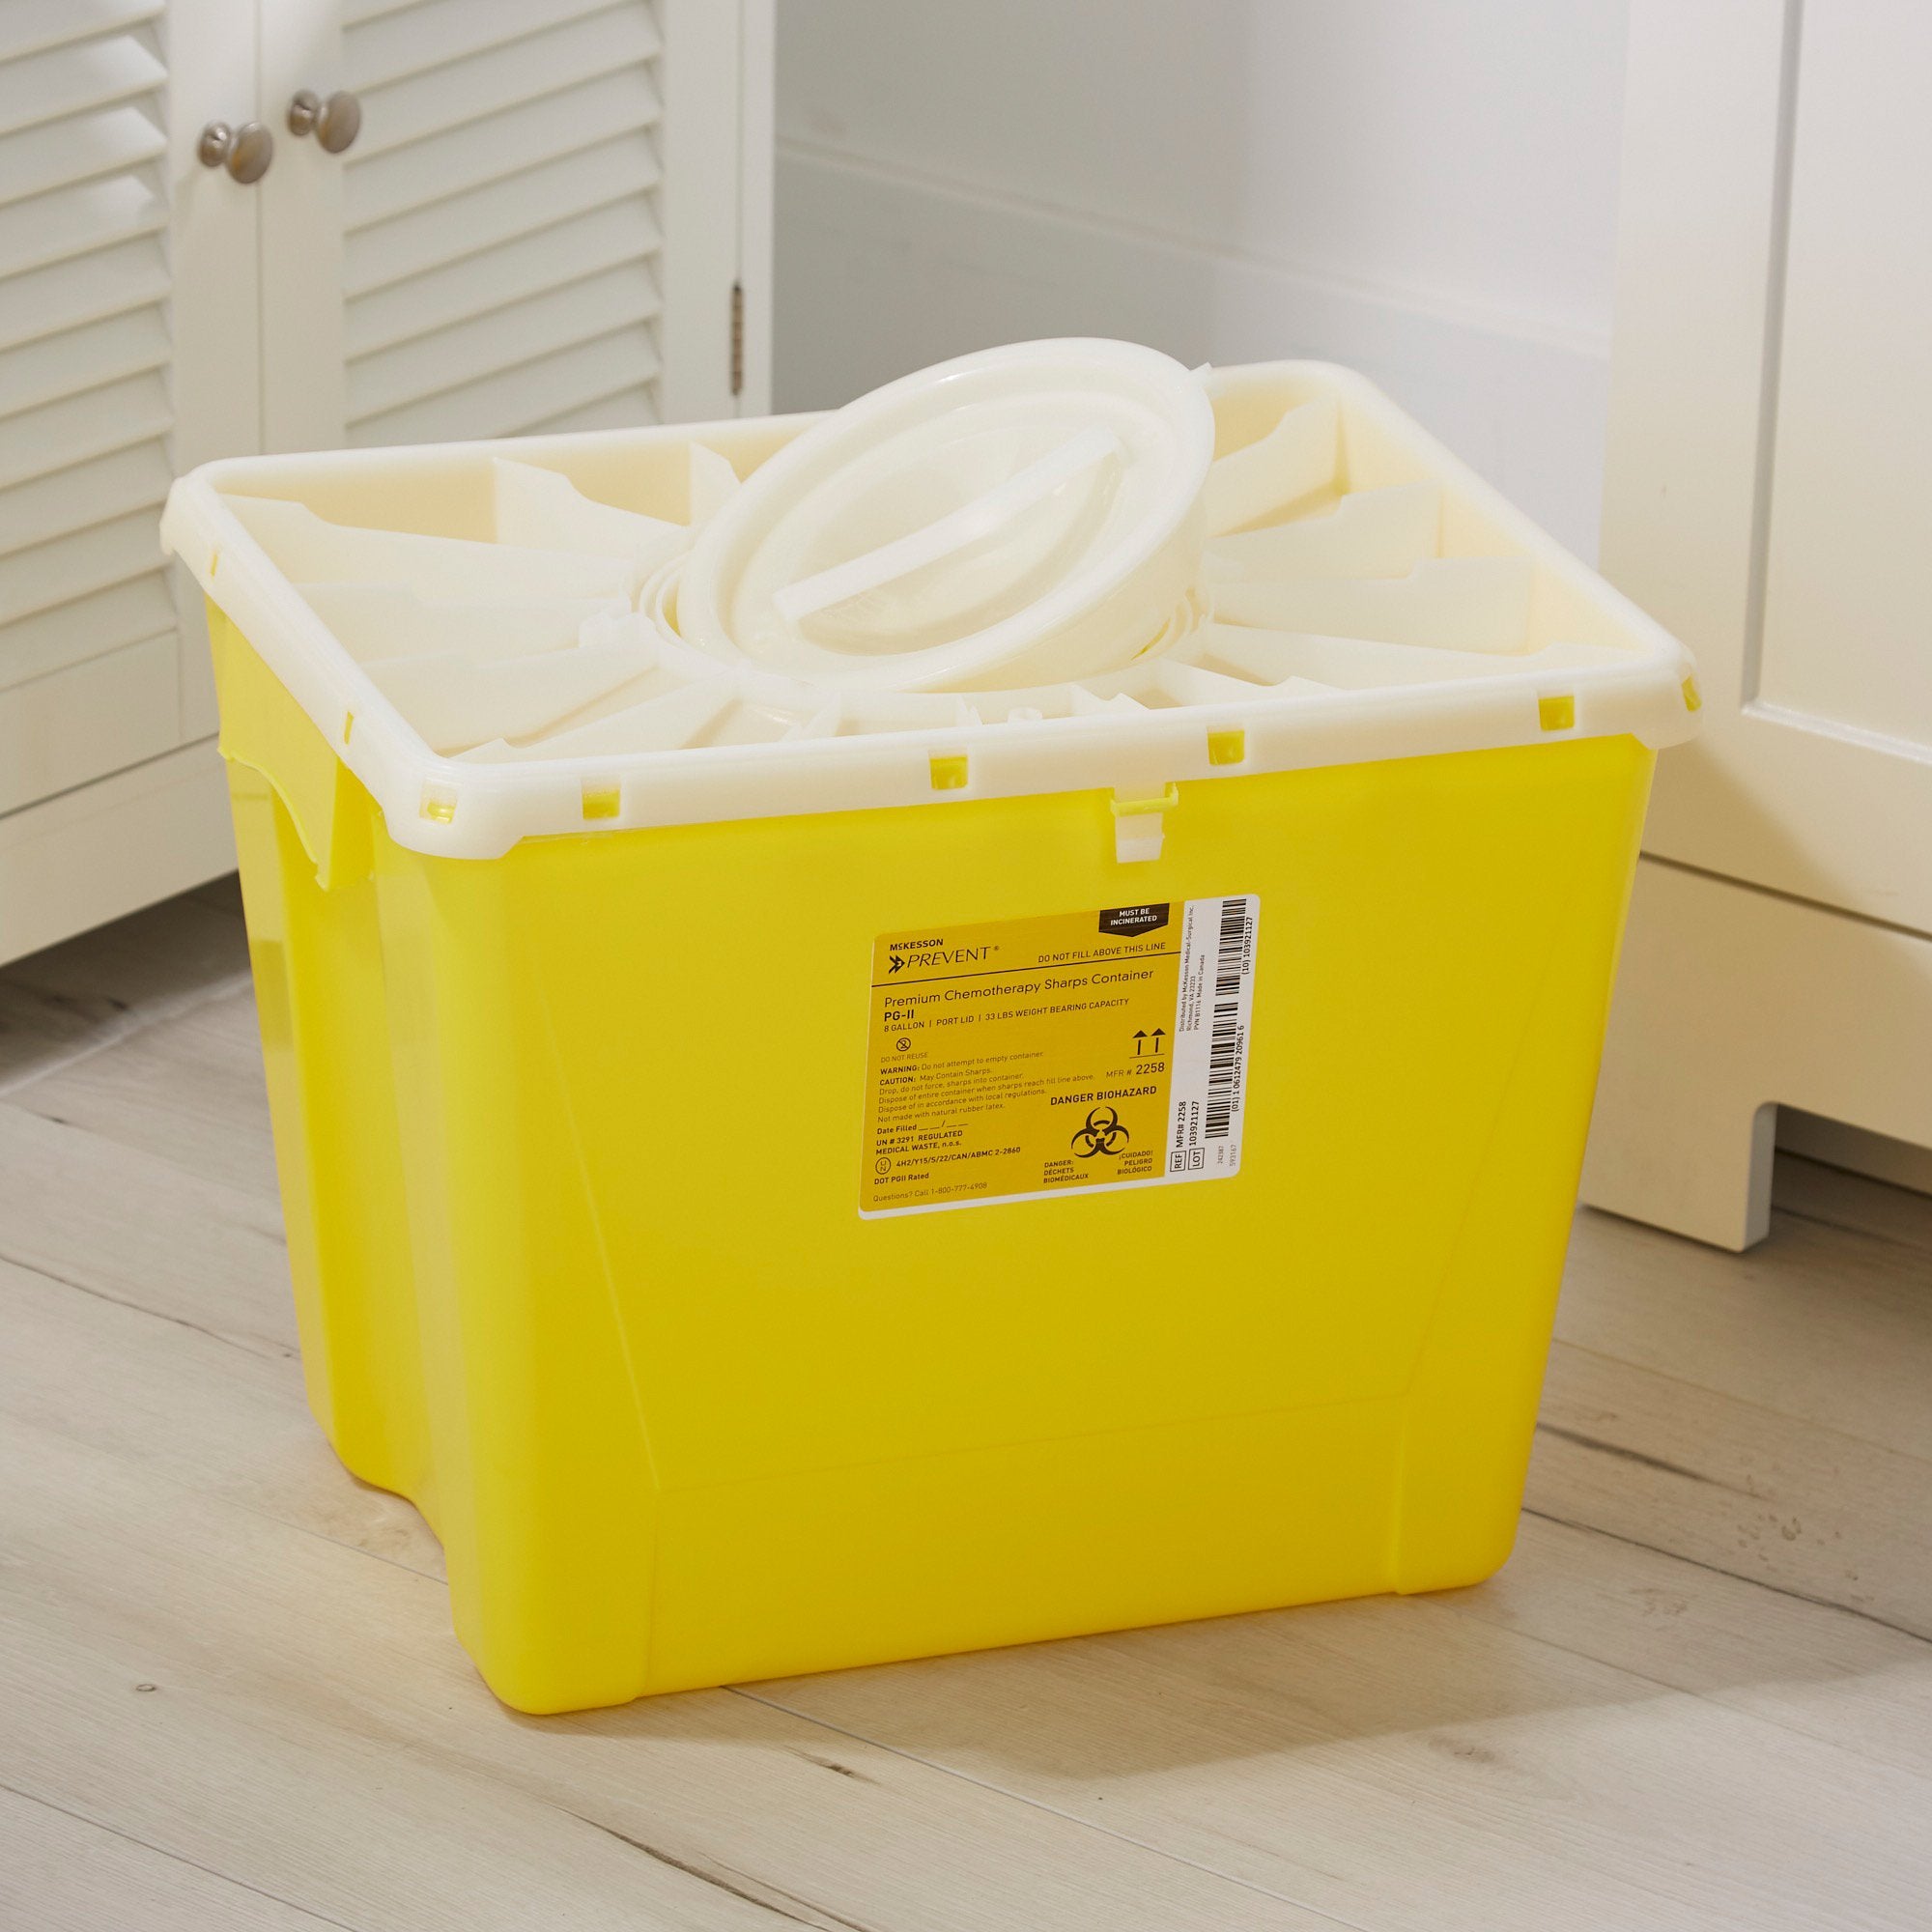 Chemotherapy Waste Container McKesson Prevent Yellow Base 13-1/2 H X 17-3/10 W X 13 L Inch Vertical Entry 8 Gallon